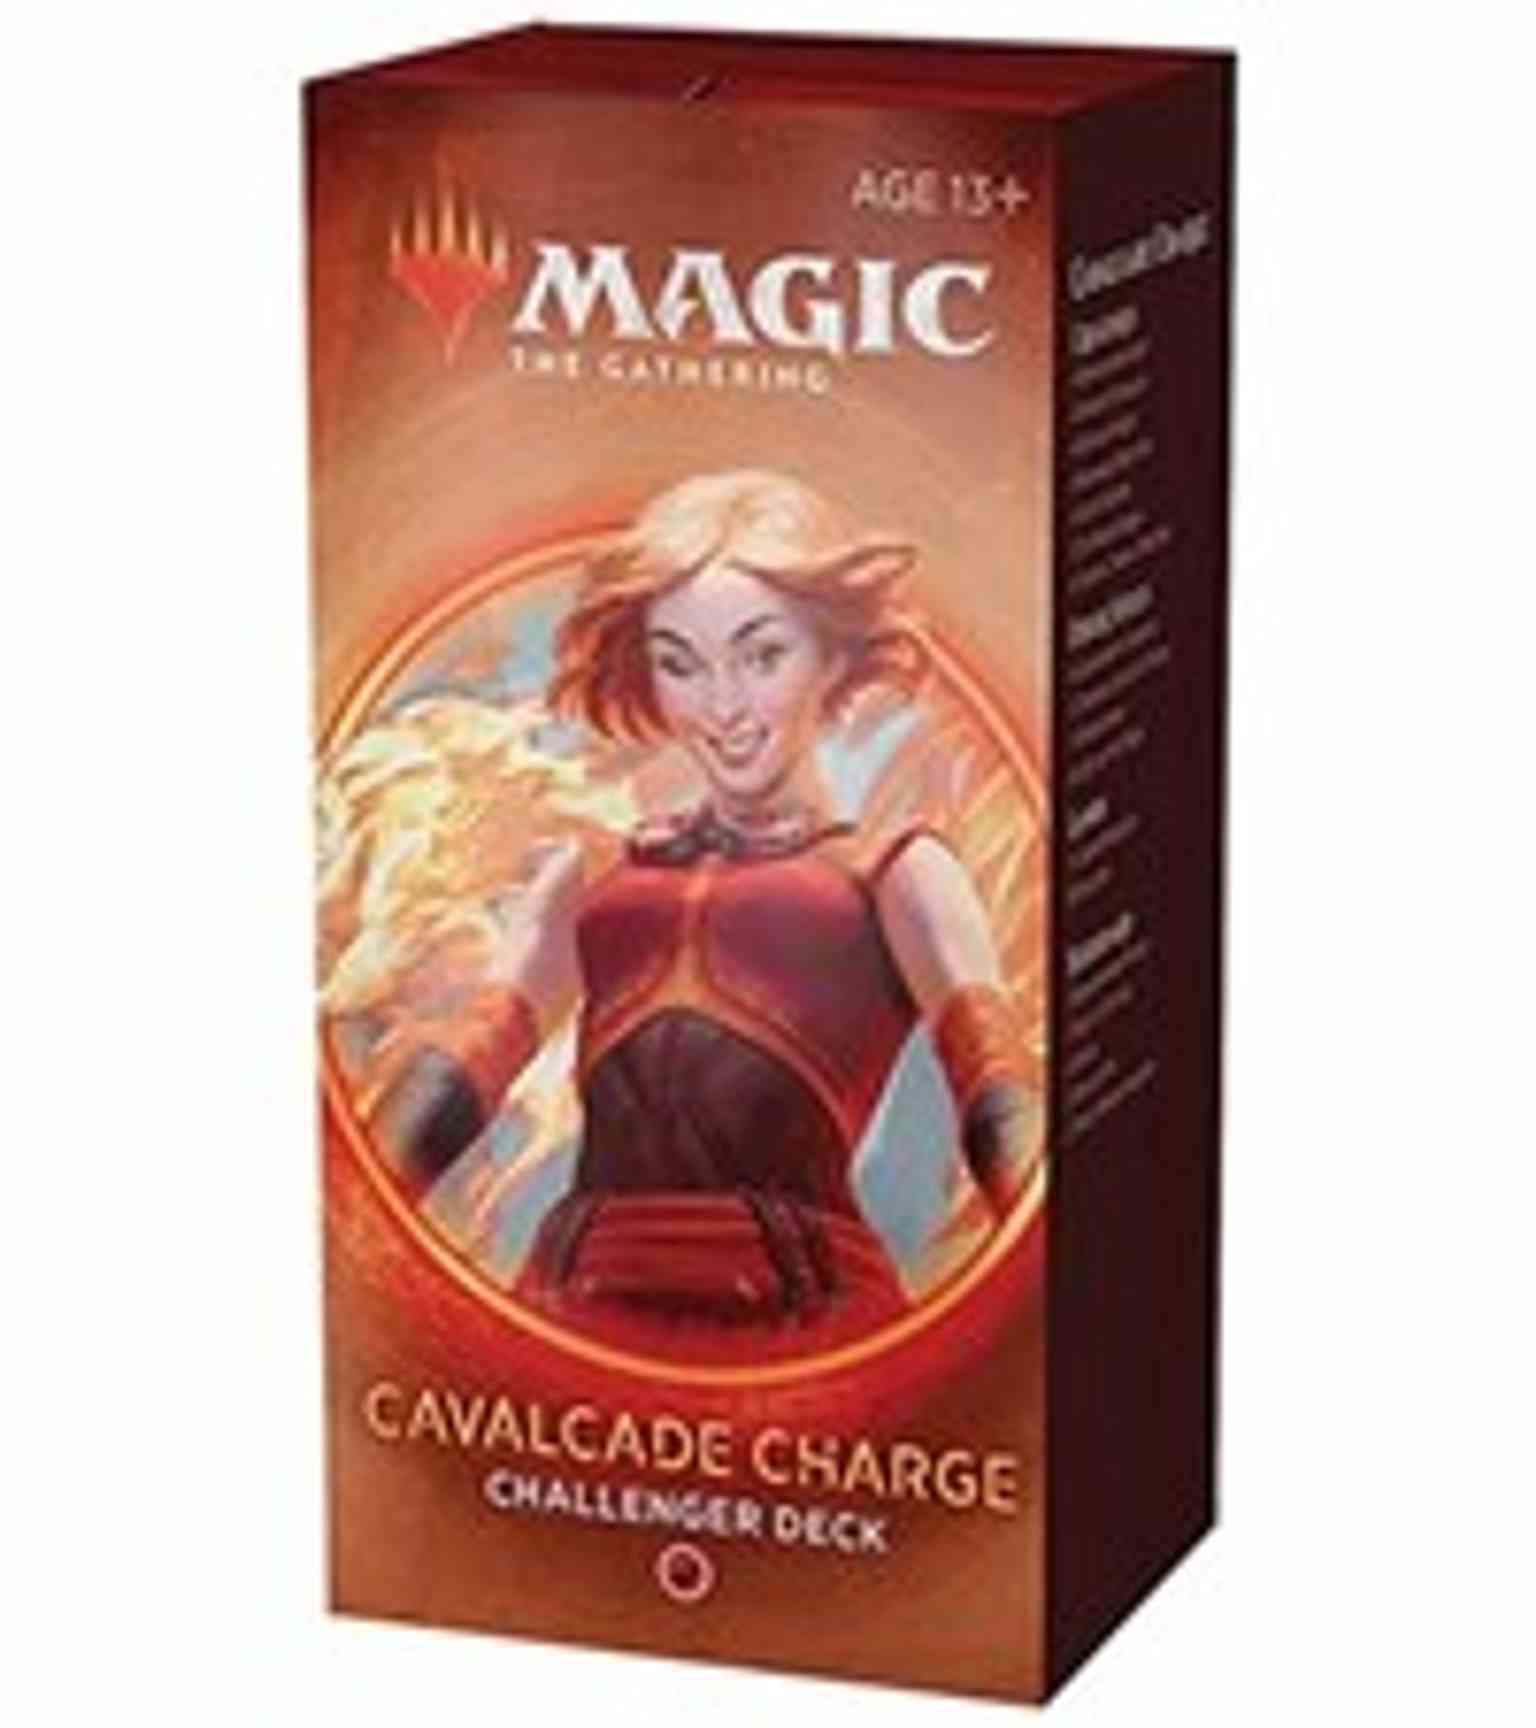 Challenger Deck 2020: Cavalcade Charge magic card front